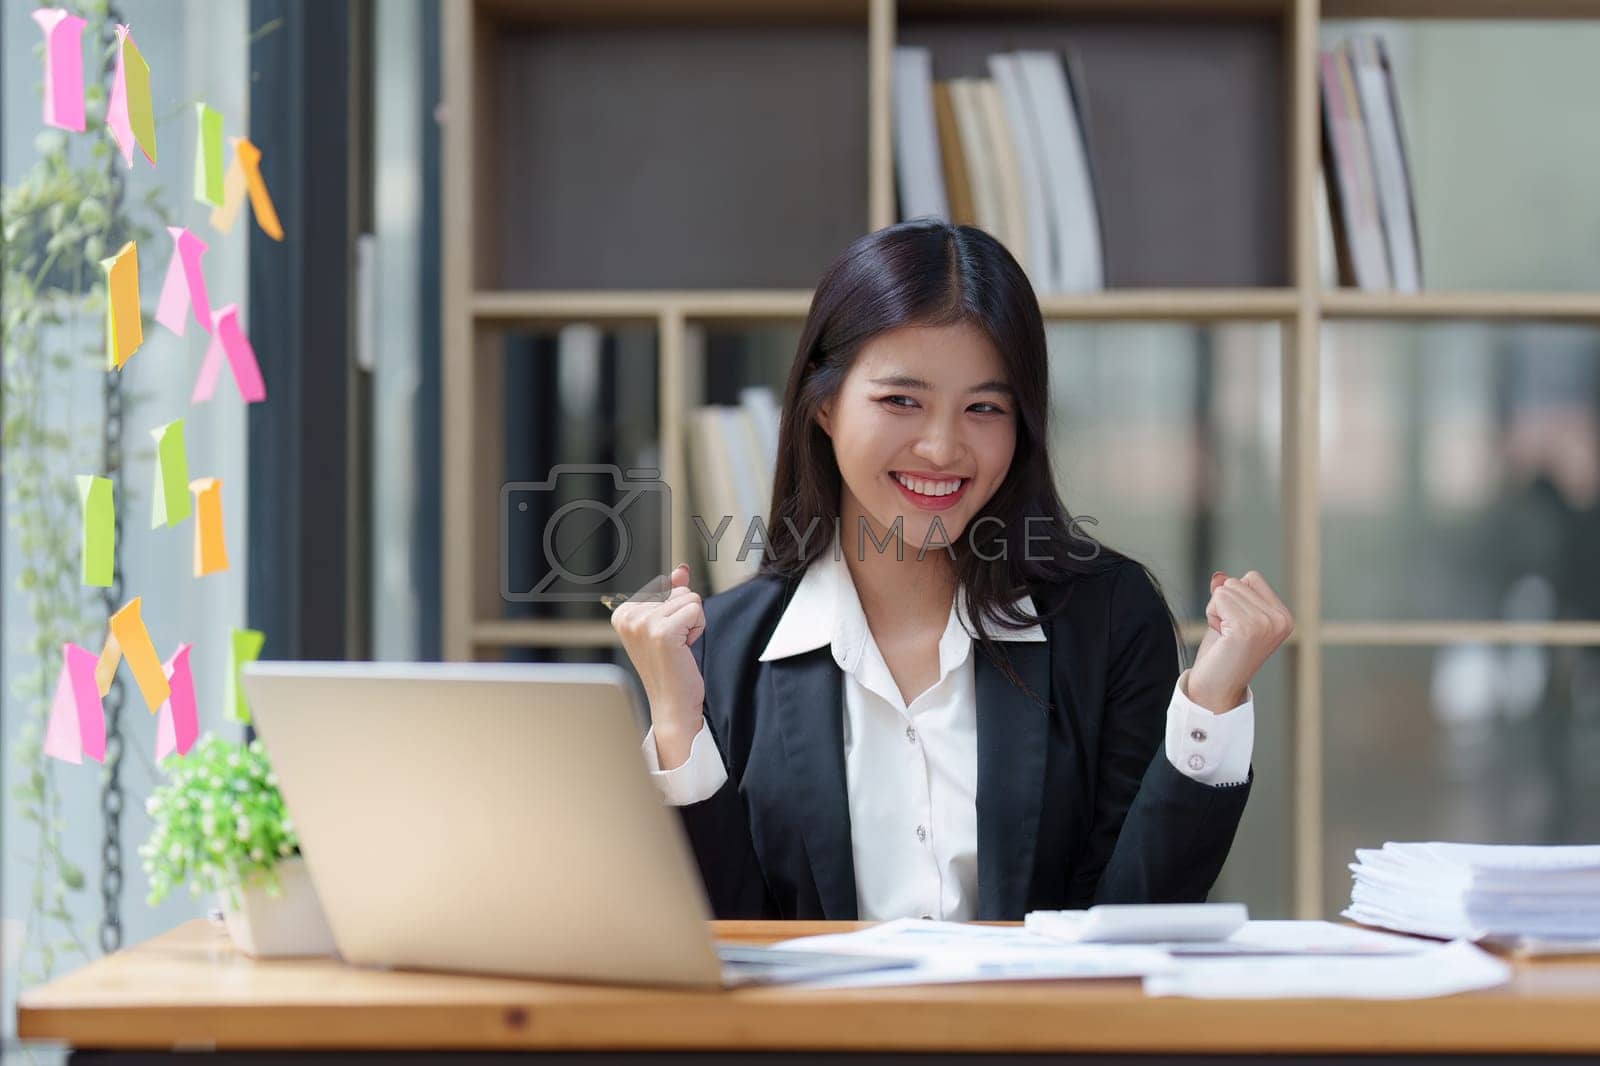 Royalty free image of Asian Businessperson using laptop and celebrating victory and success, have good news, job celebrating achievement. by itchaznong